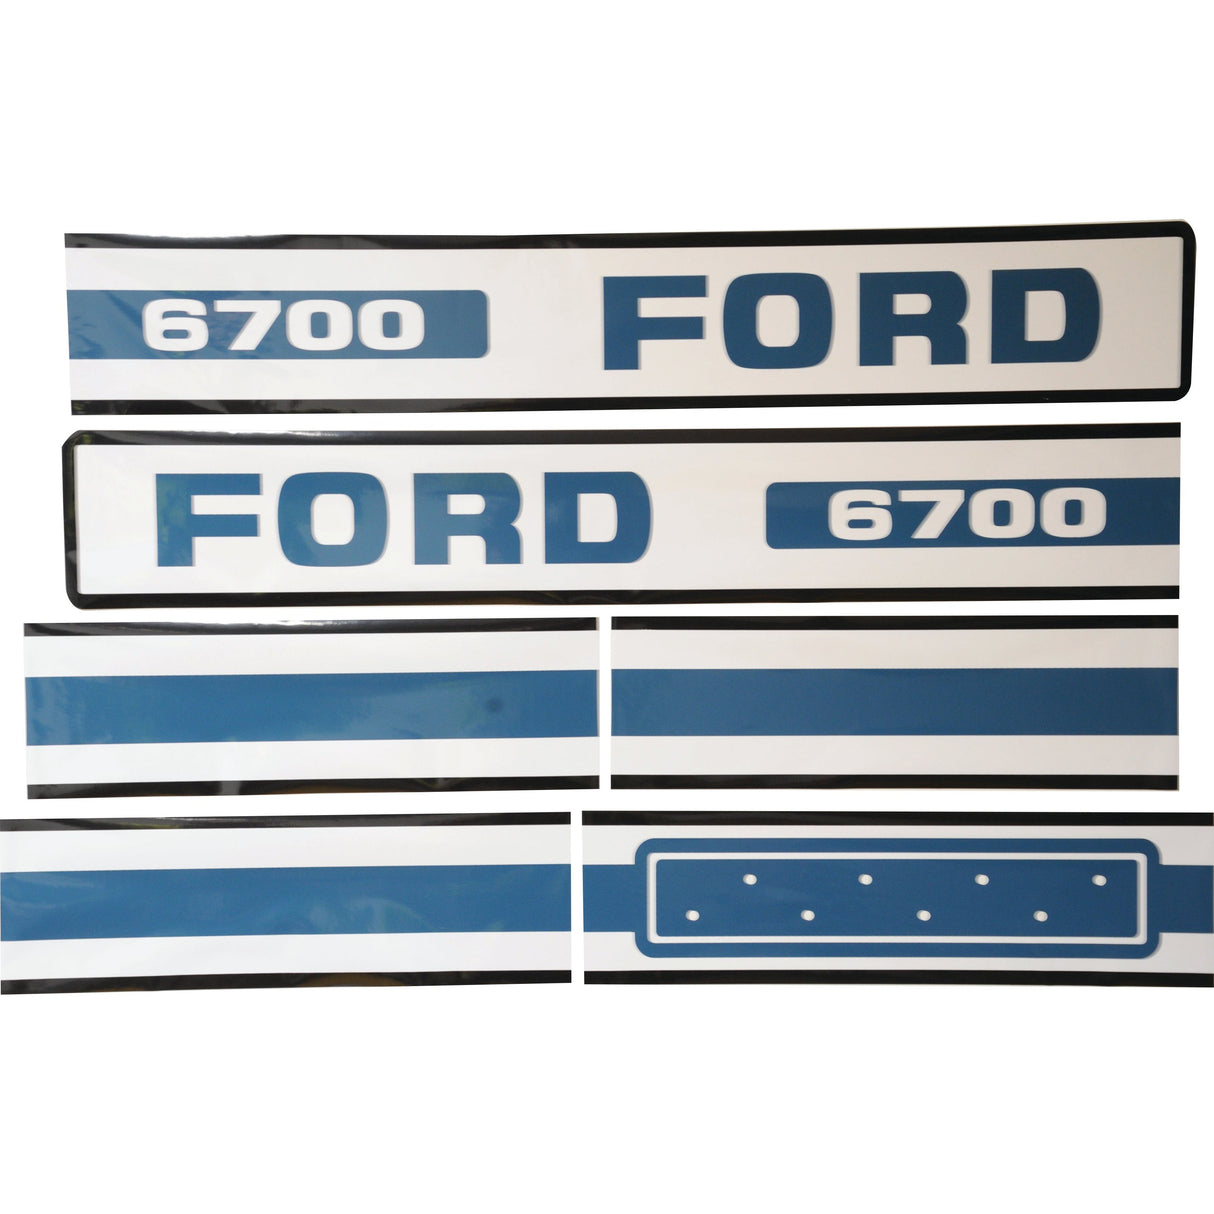 Decal Set - Ford / New Holland 6700
 - S.8420 - Farming Parts